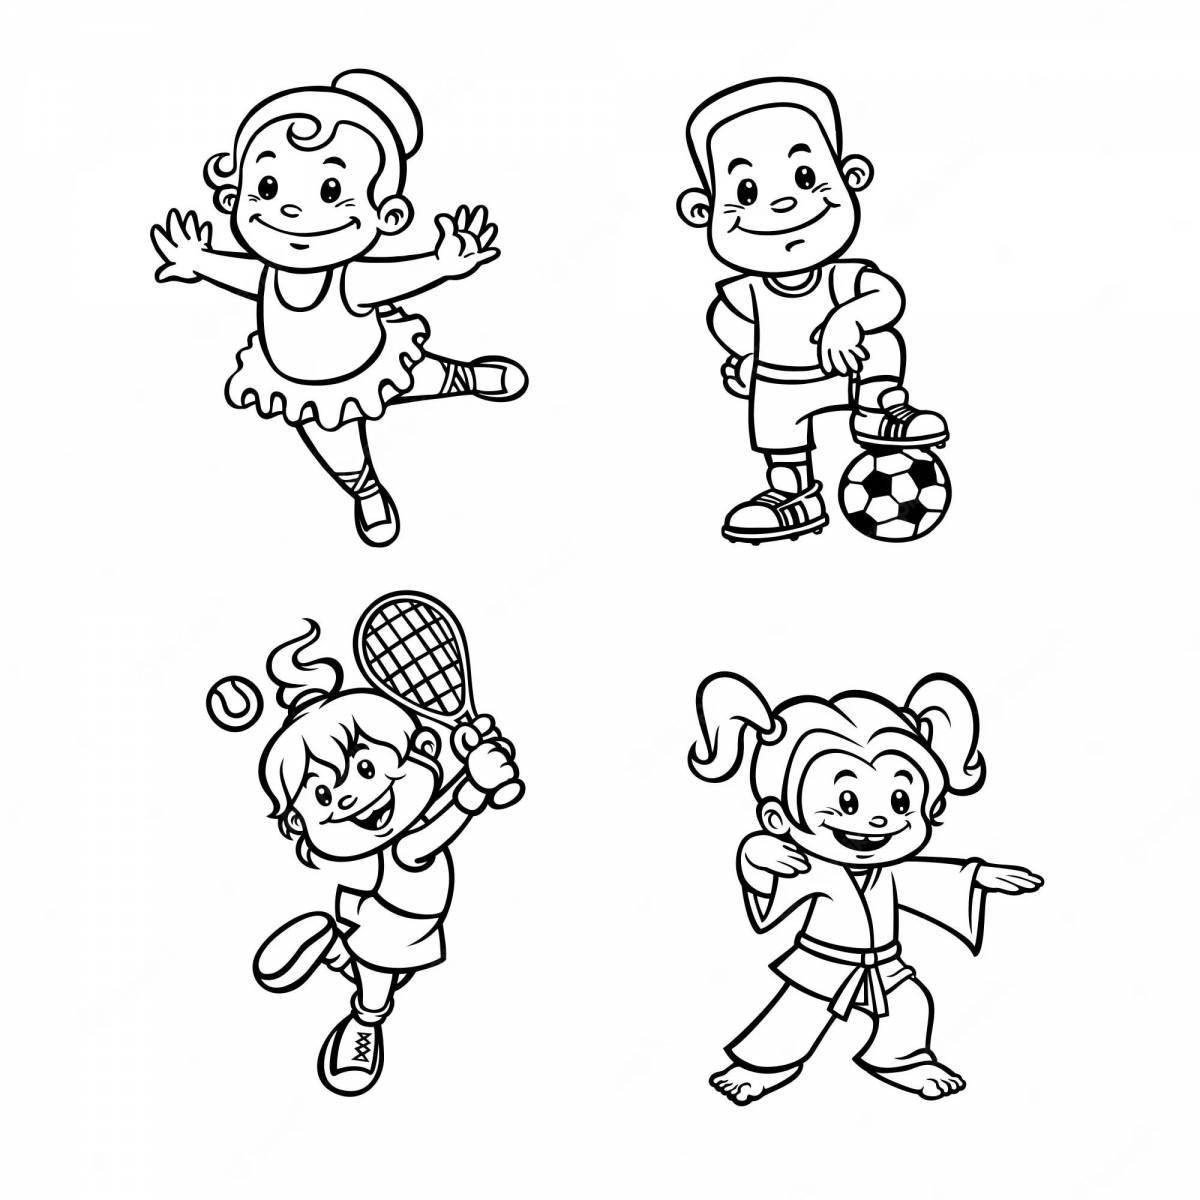 Creative sports coloring book for 6-7 year olds